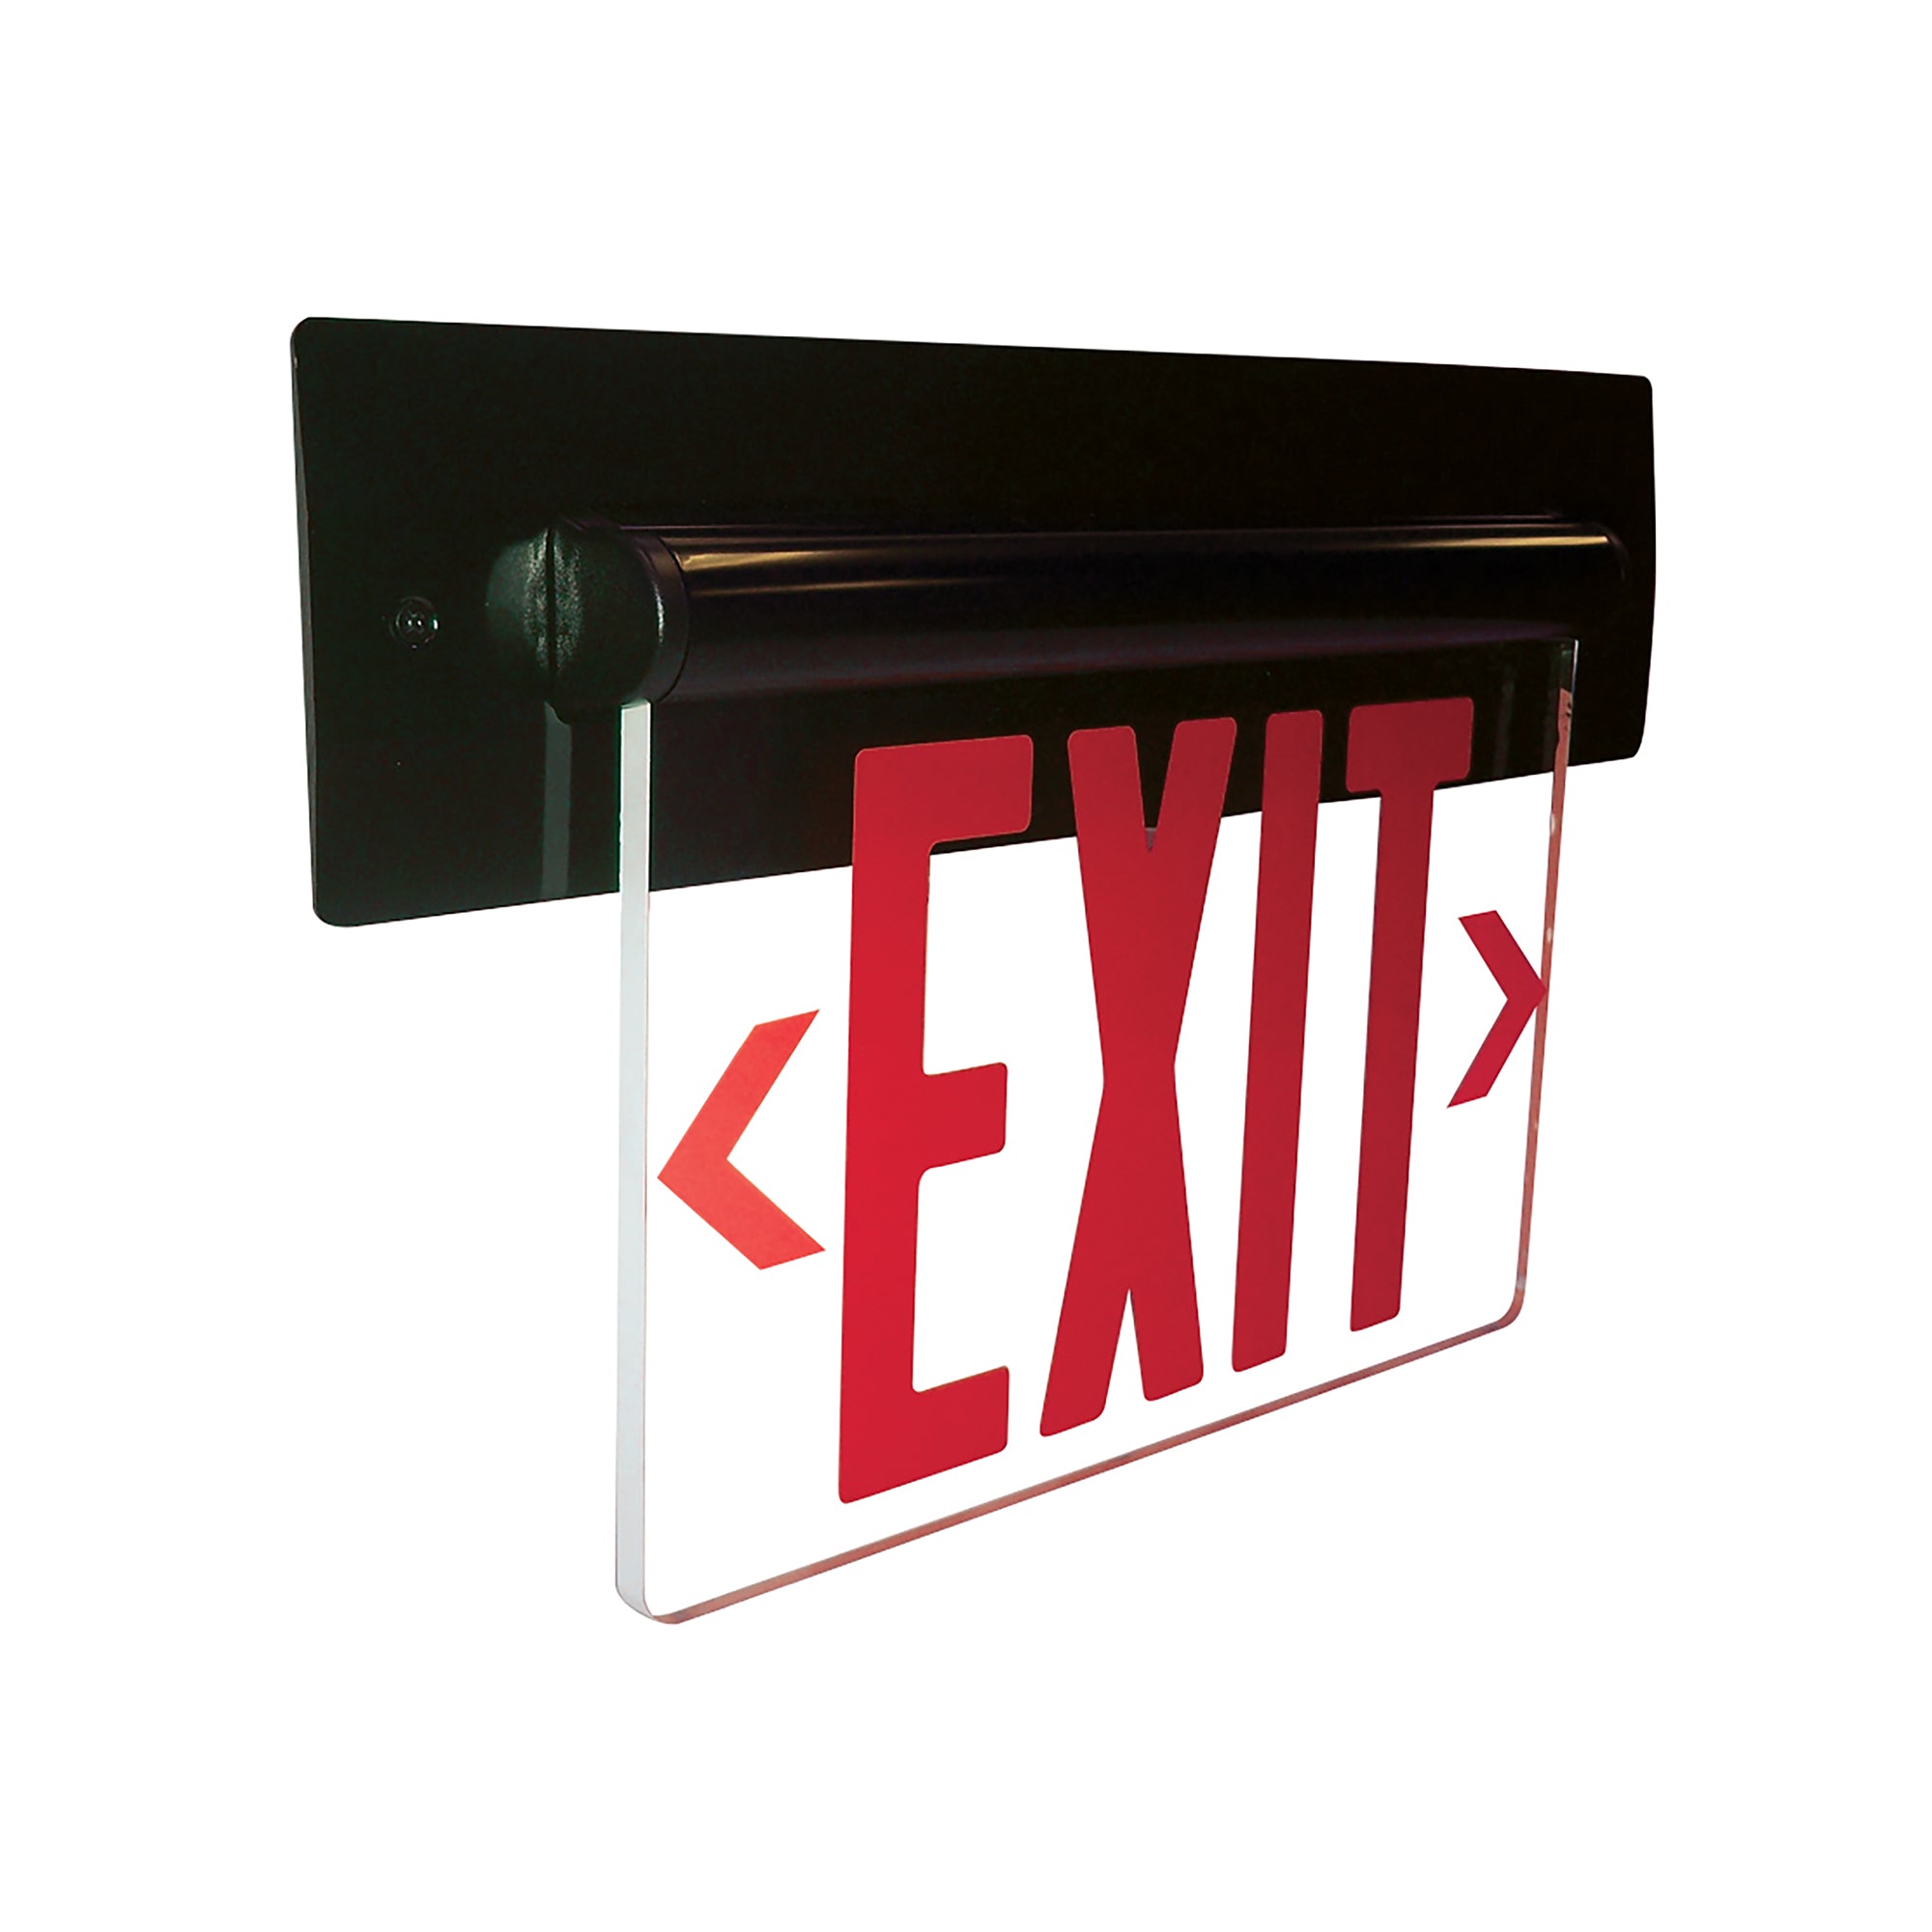 Nora Lighting NX-815-LEDRCB - Exit / Emergency - Recessed Adjustable LED Edge-Lit Exit Sign, Battery Backup, 6 Inch Red Letters, Single Face / Clear Acrylic, Black Housing